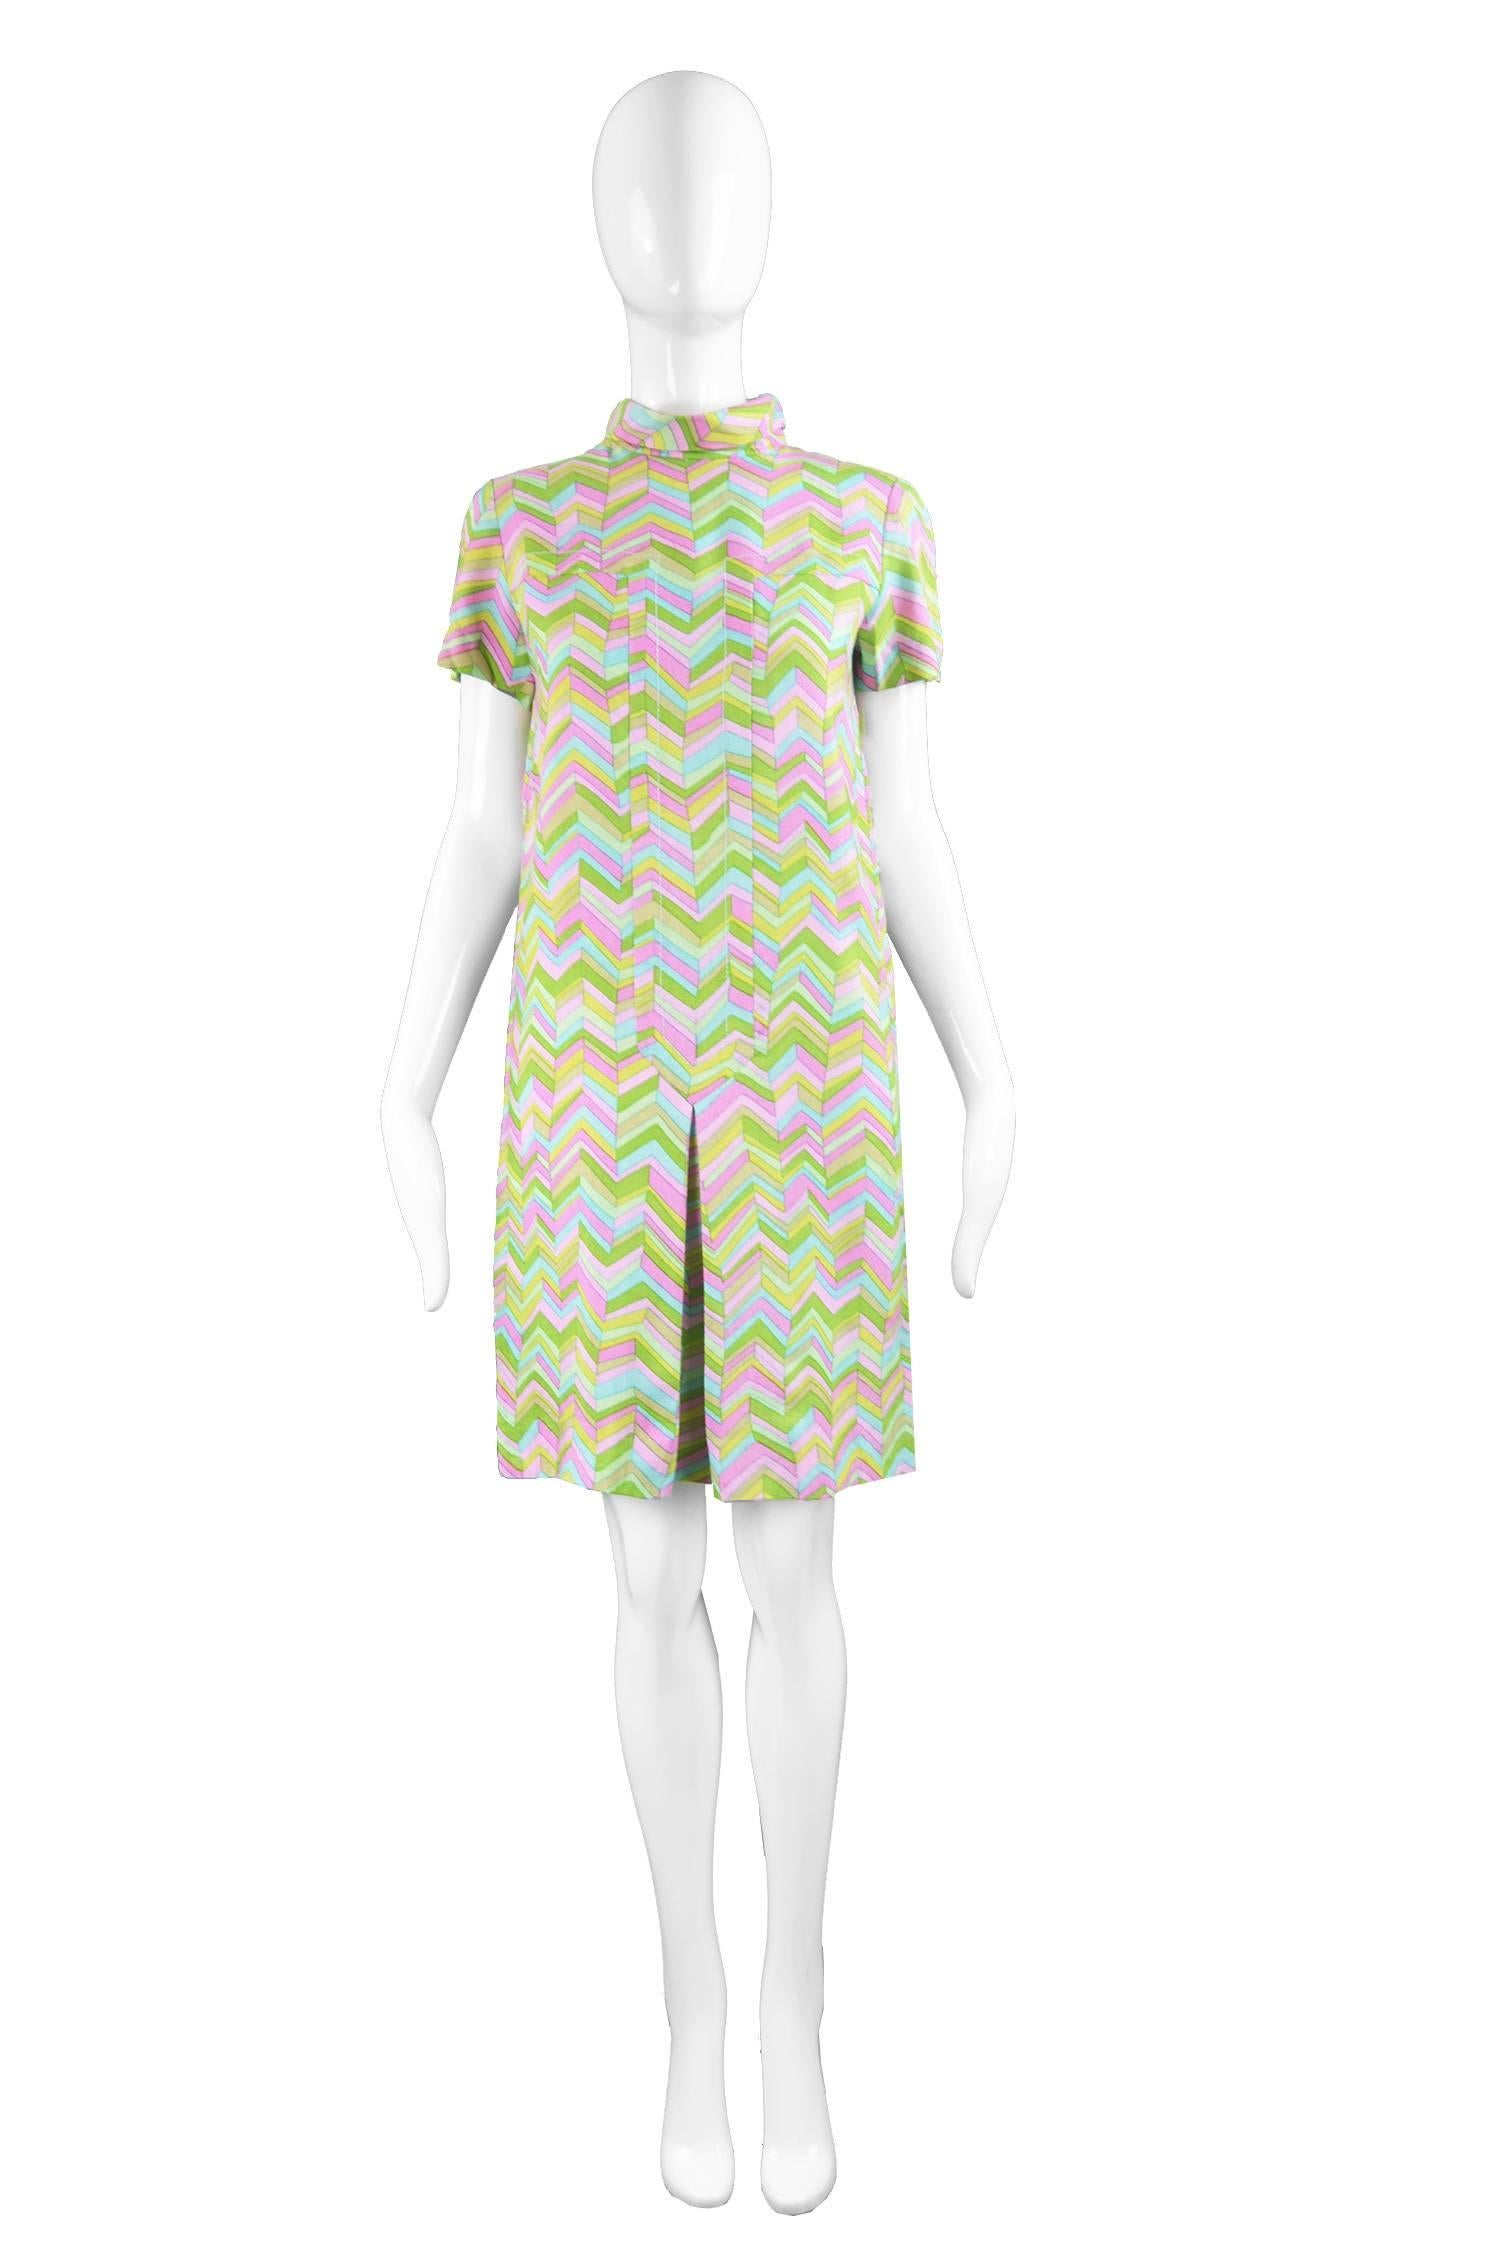 A fine and rare vintage shift dress from c. the mid 60s by Pierre Cardin under the rare 'Jeunesse' line for luxury Japanese department store, Takashimaya. In a colourful, pink blue and green lightweight linen with zig zags throughout. With a high